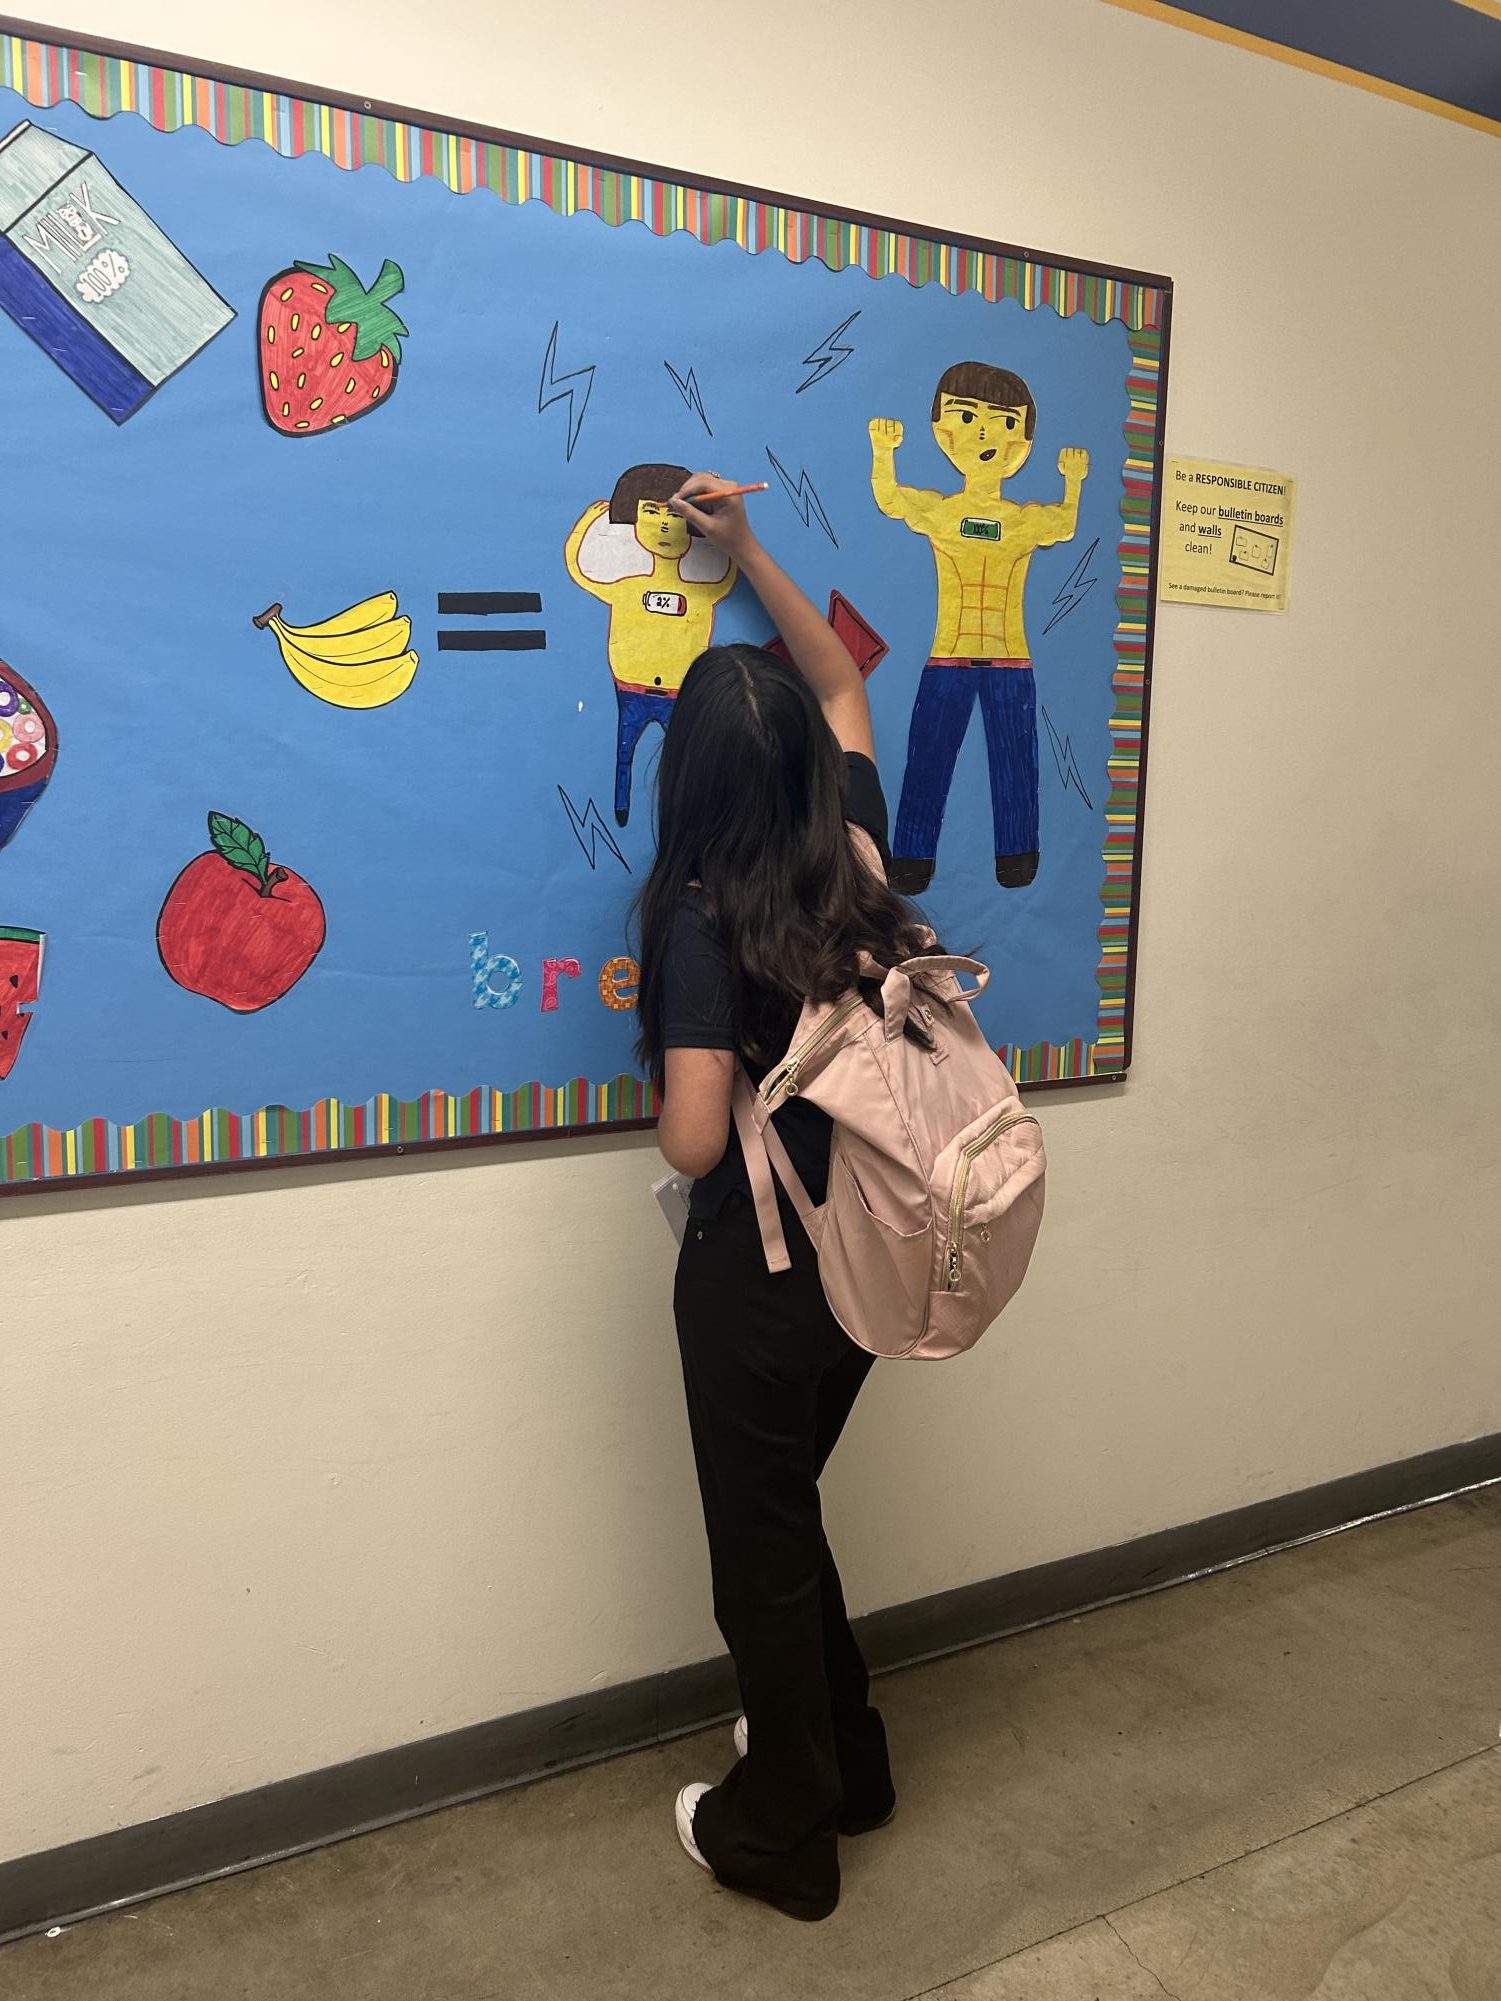 Geraldine is drawing on the bulletin board for student council.